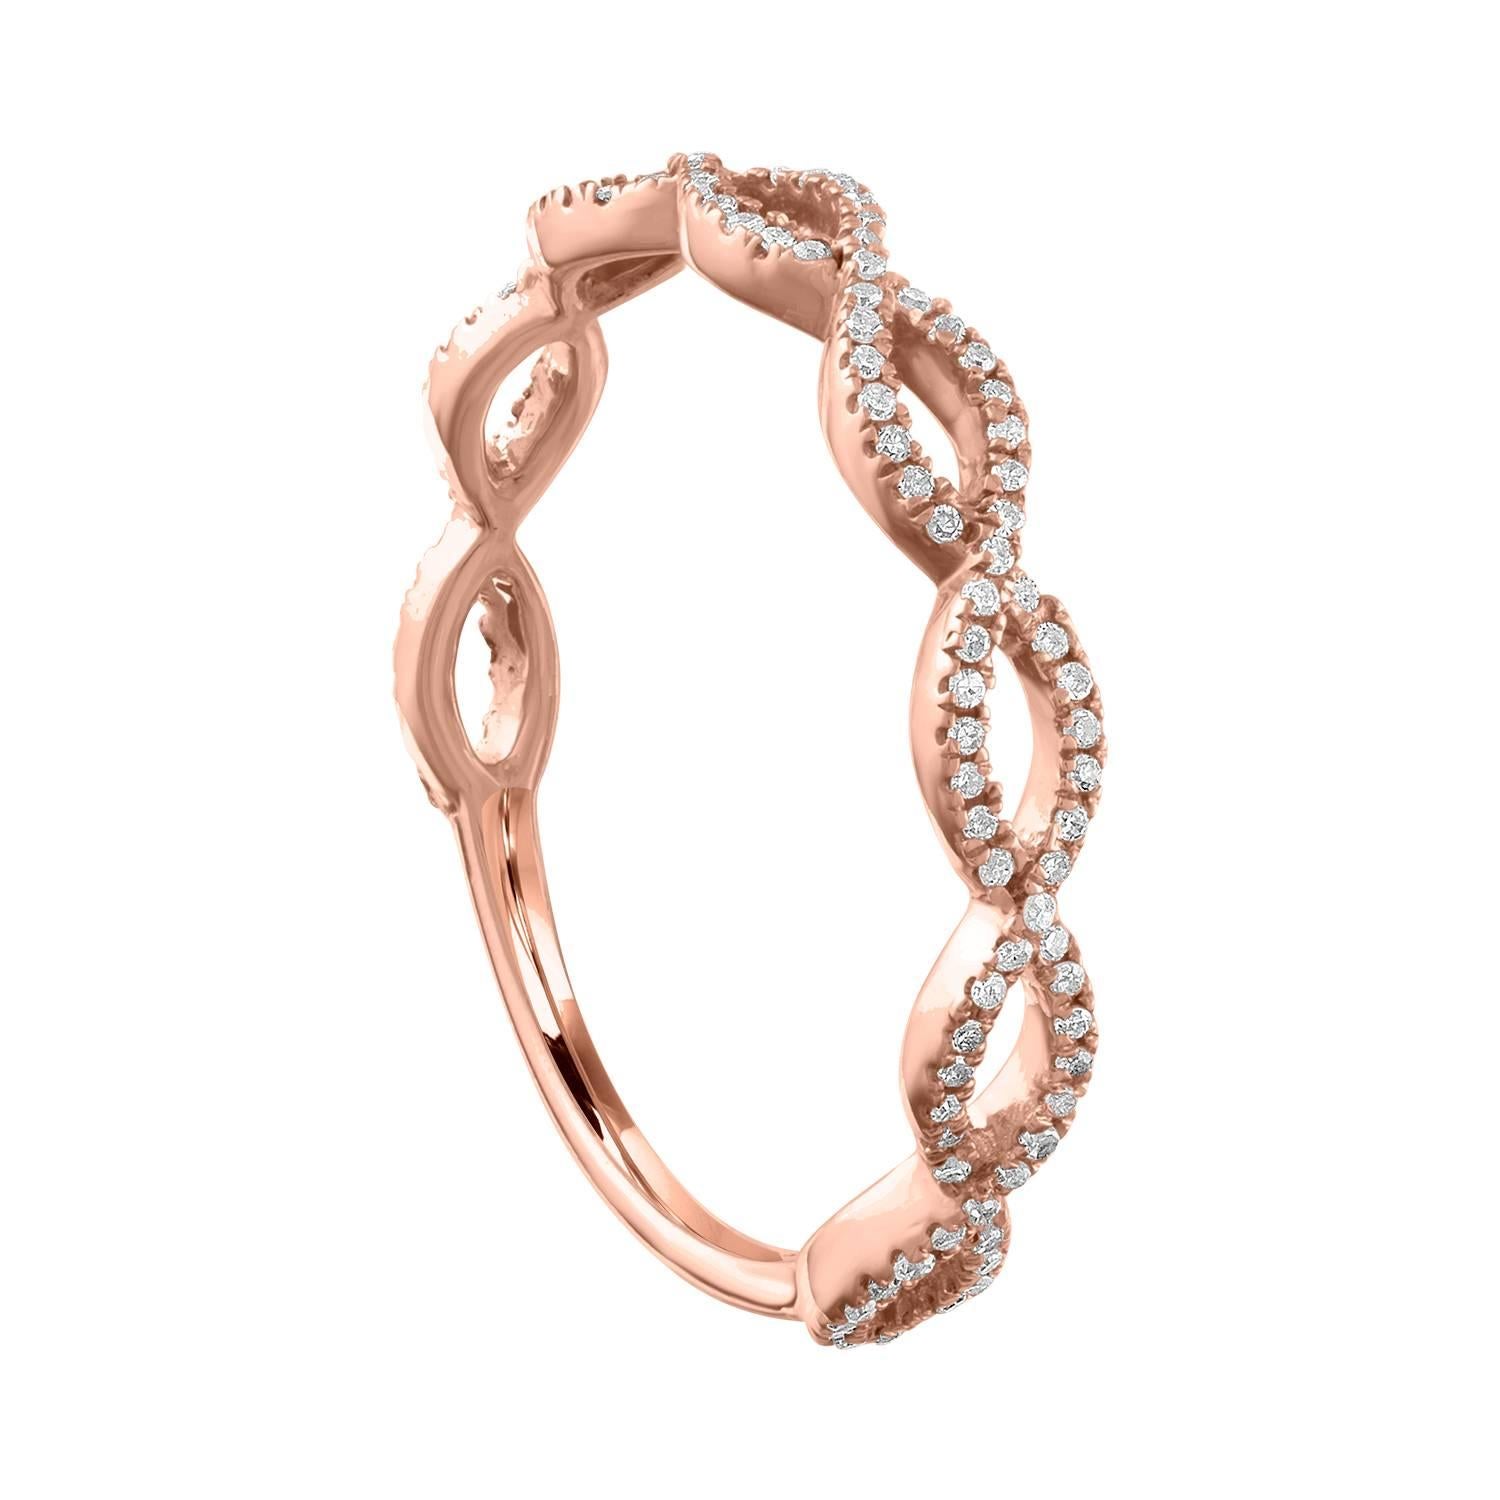 Beautiful Infinity Design Band Ring.
The ring is 14K Rose Gold.
There are 0.17 Carats in Diamonds H I1.
The ring is a size 7, sizable.
The ring weighs 1.6 grams.